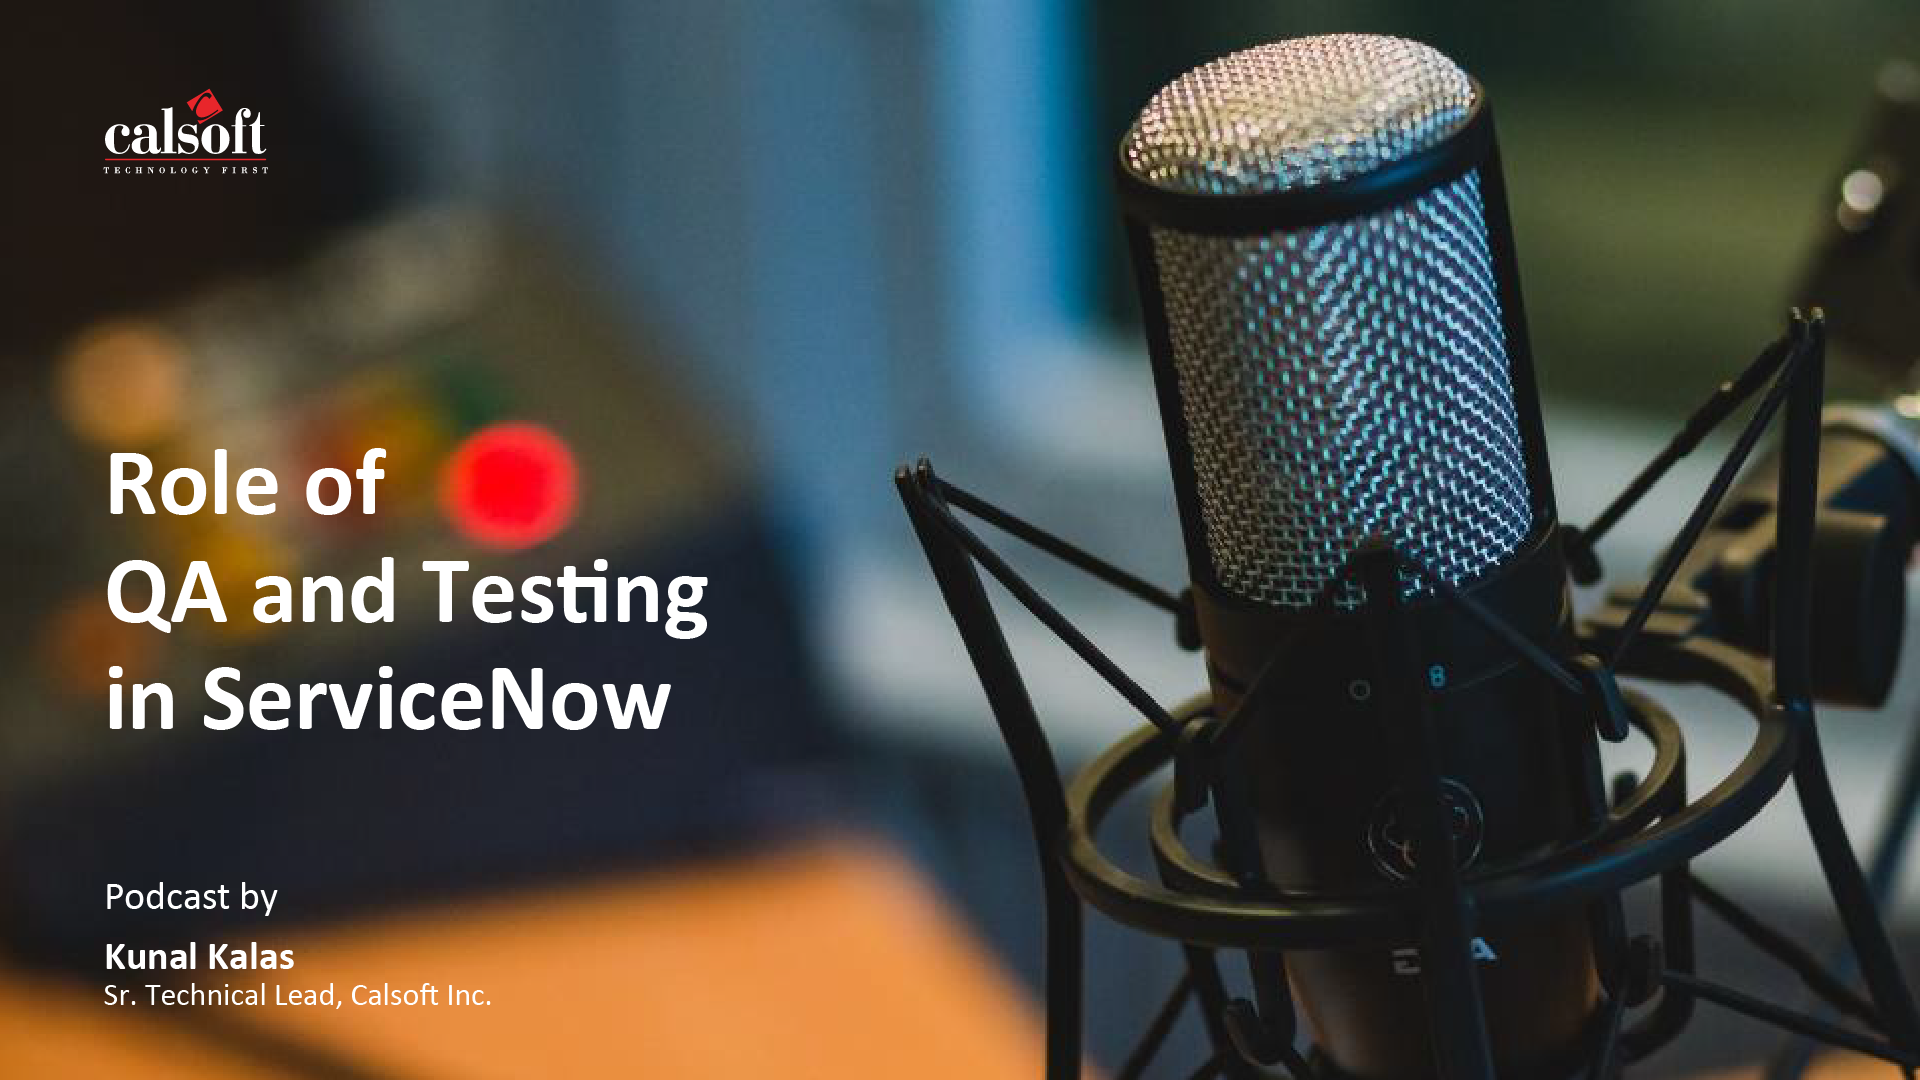 Role of QA and Testing in ServiceNow